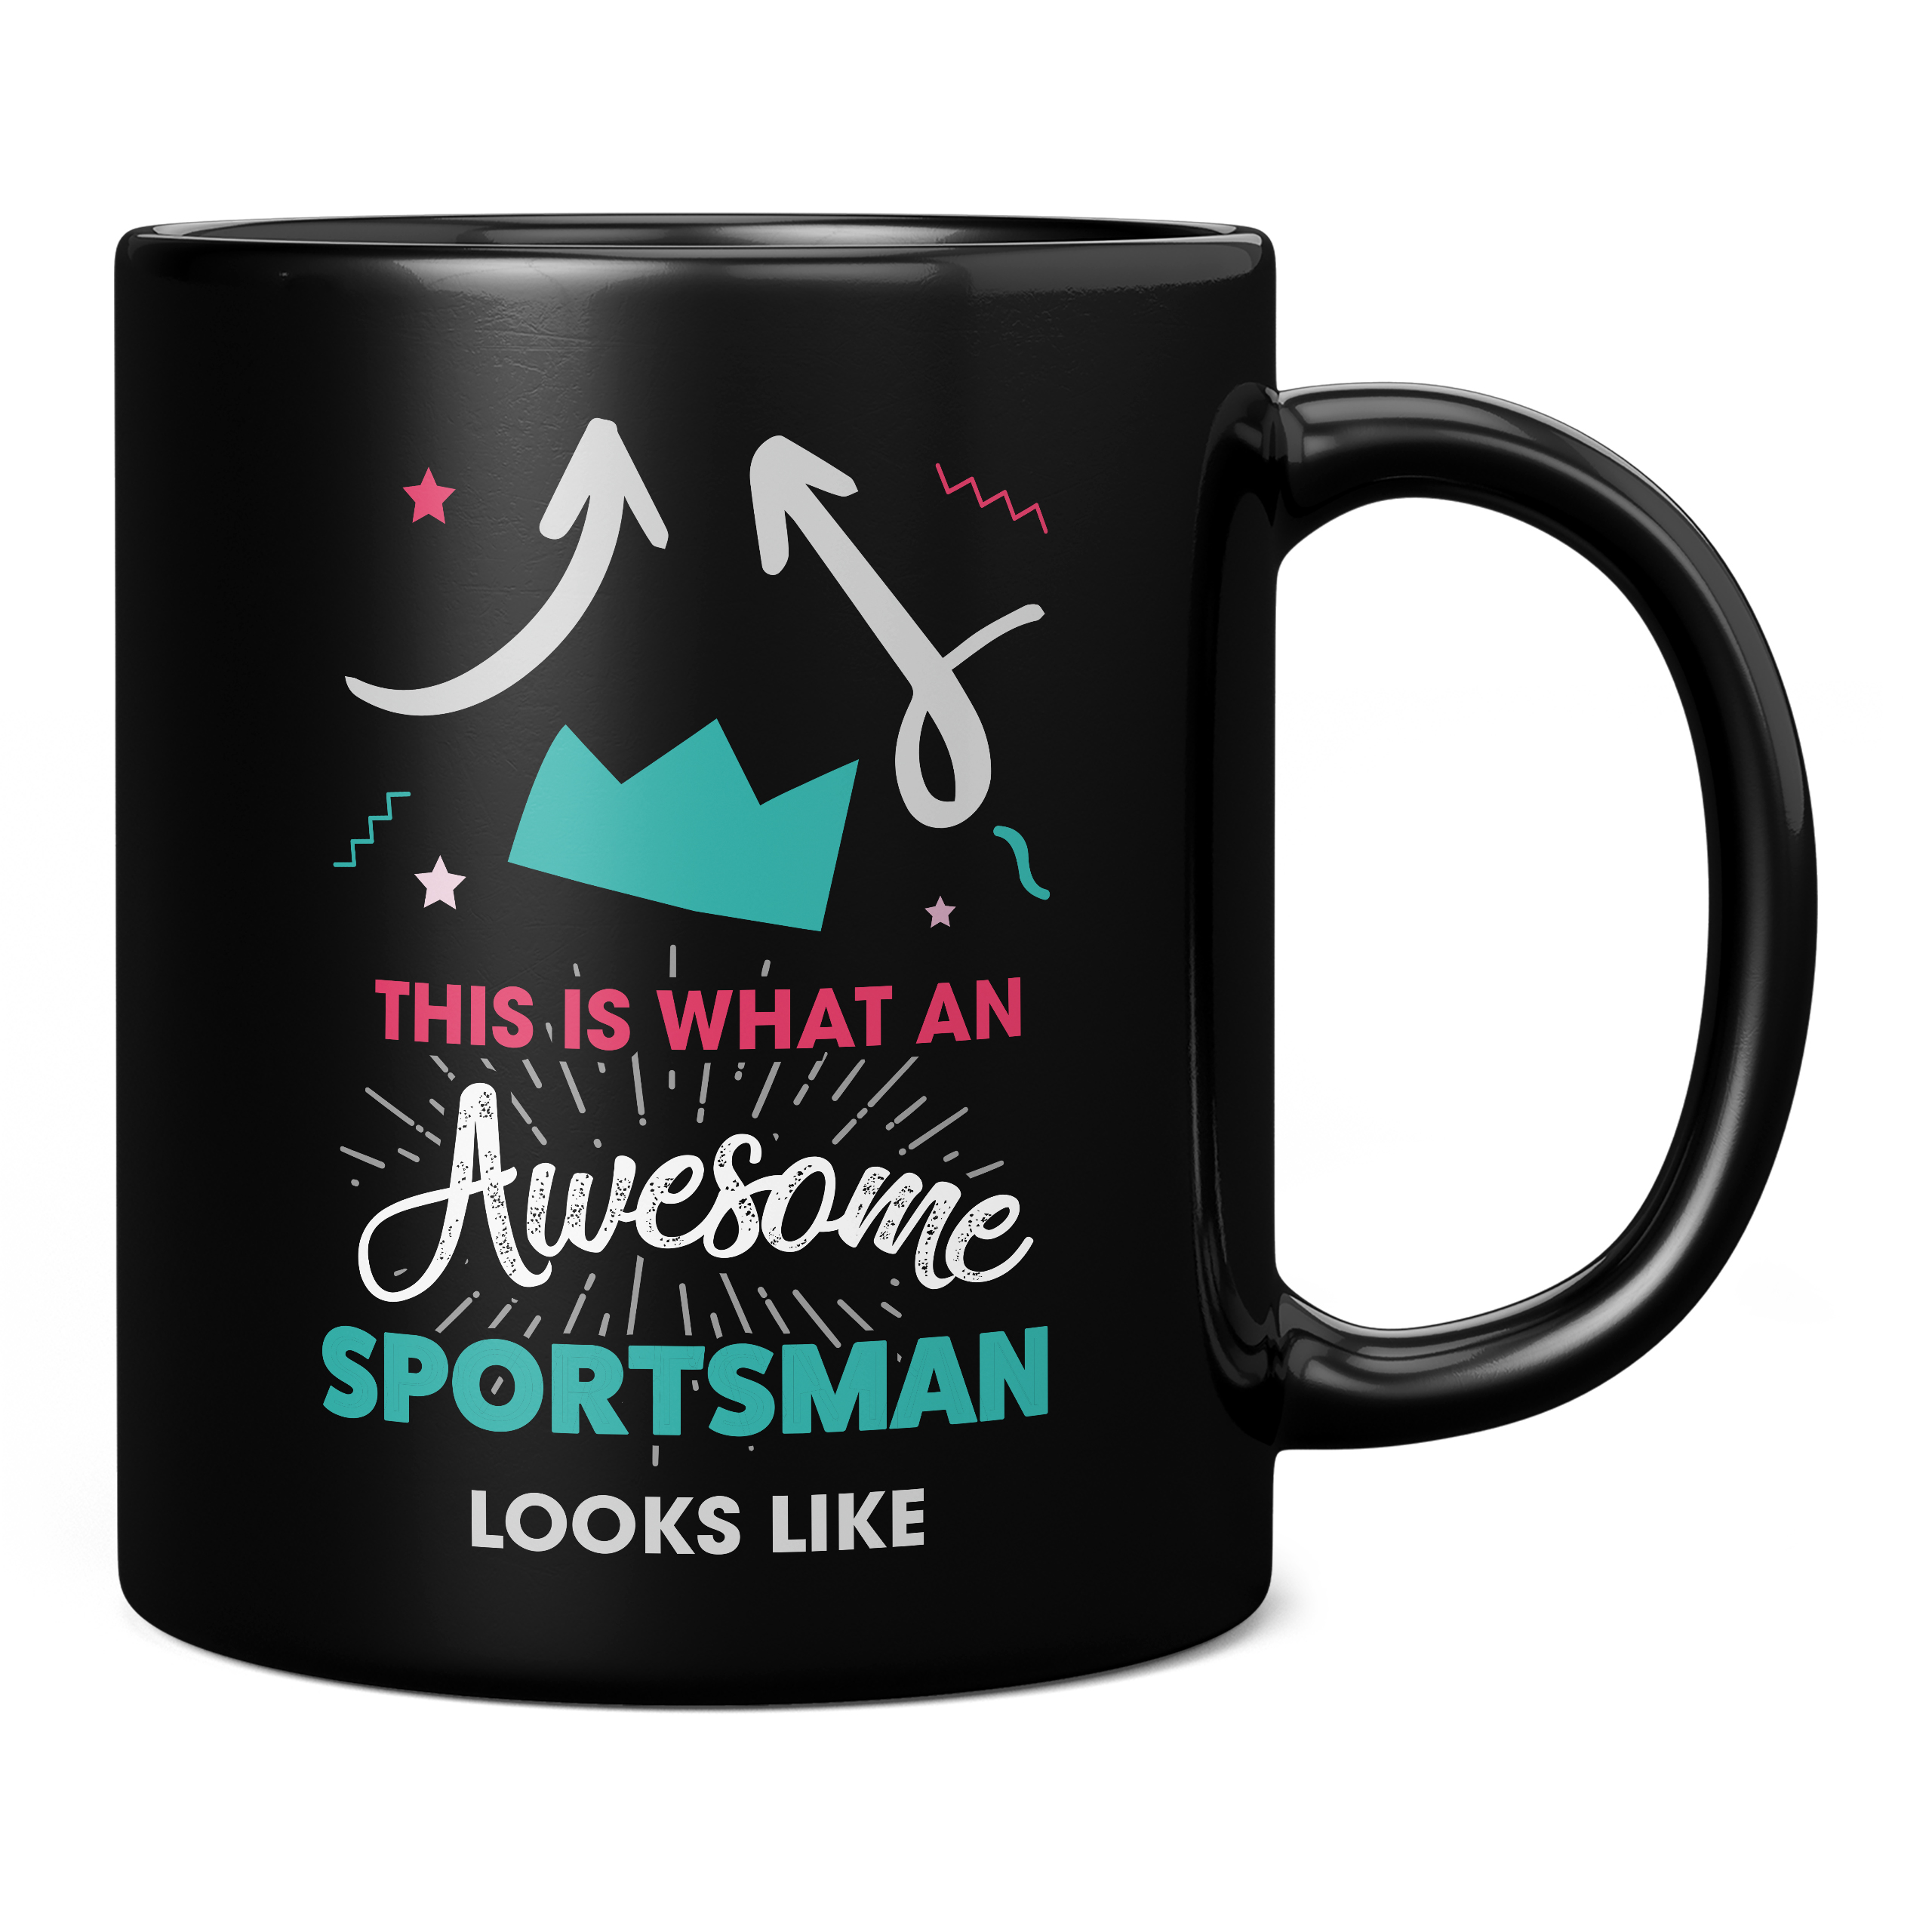 THIS IS WHAT AN AWESOME SPORTSMAN LOOKS LIKE 11OZ NOVELTY MUG